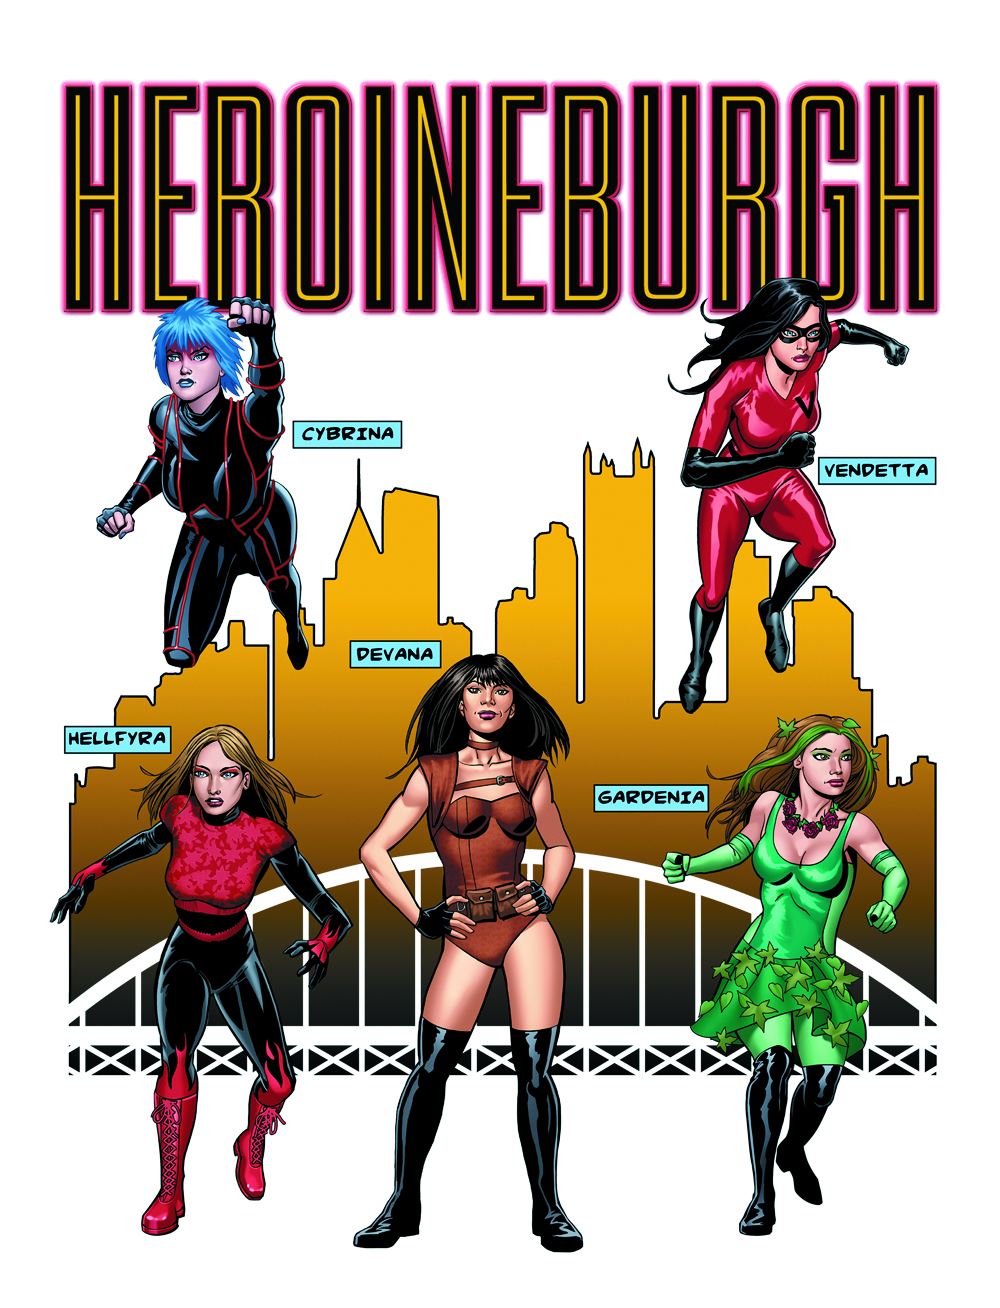 Heroineburgh graphic #1 by DC colorist Jason Wright. Depicted from Episodes 1-4 are Cybrina, Hellfyra, Gardenia, Devana and Vendetta.